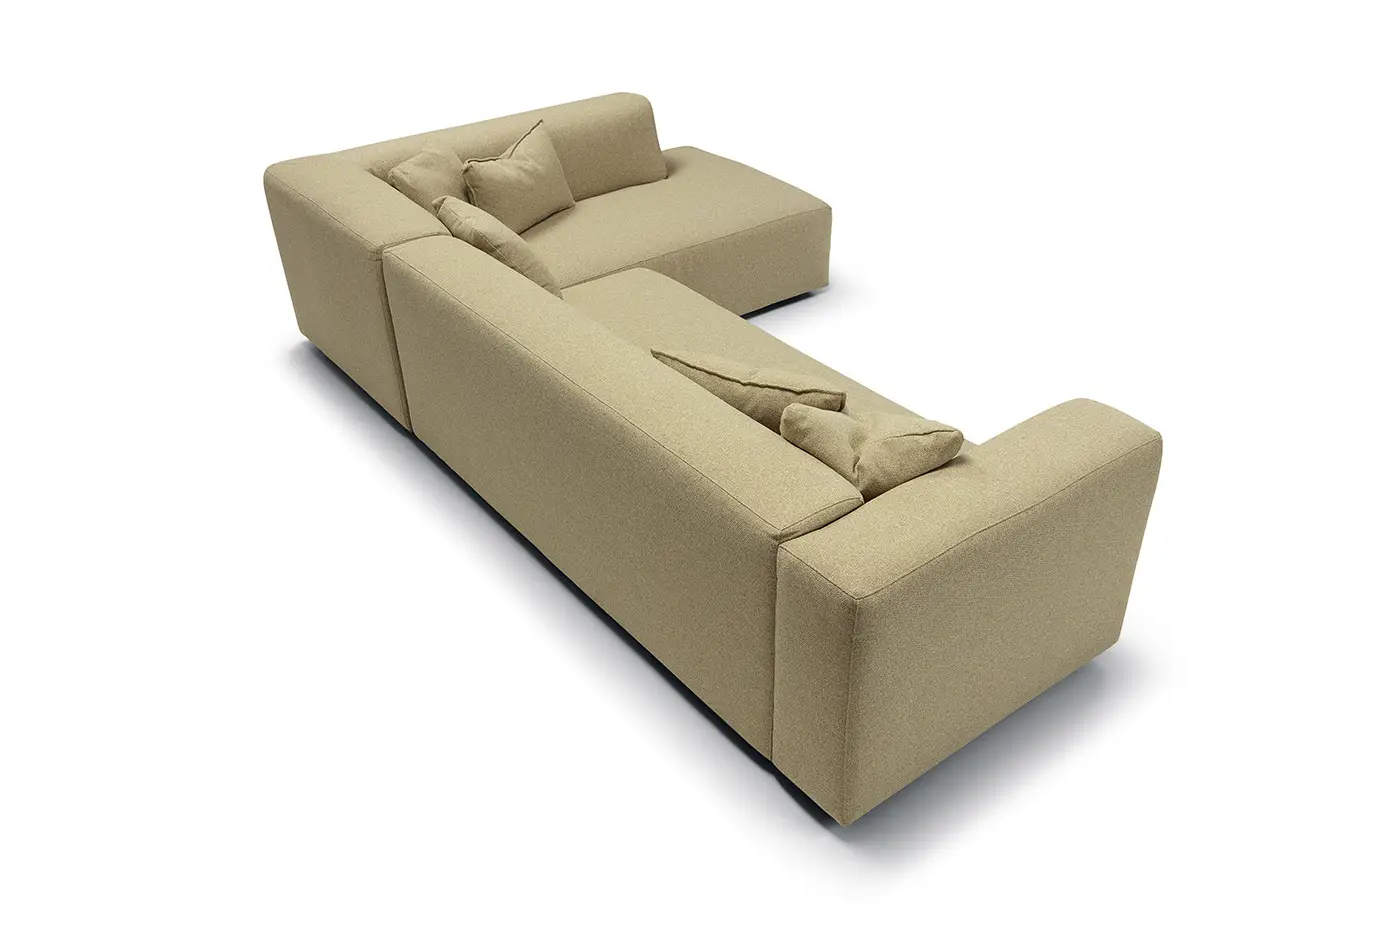 Milano furniture collection: details, dimensions, accessories SITS 